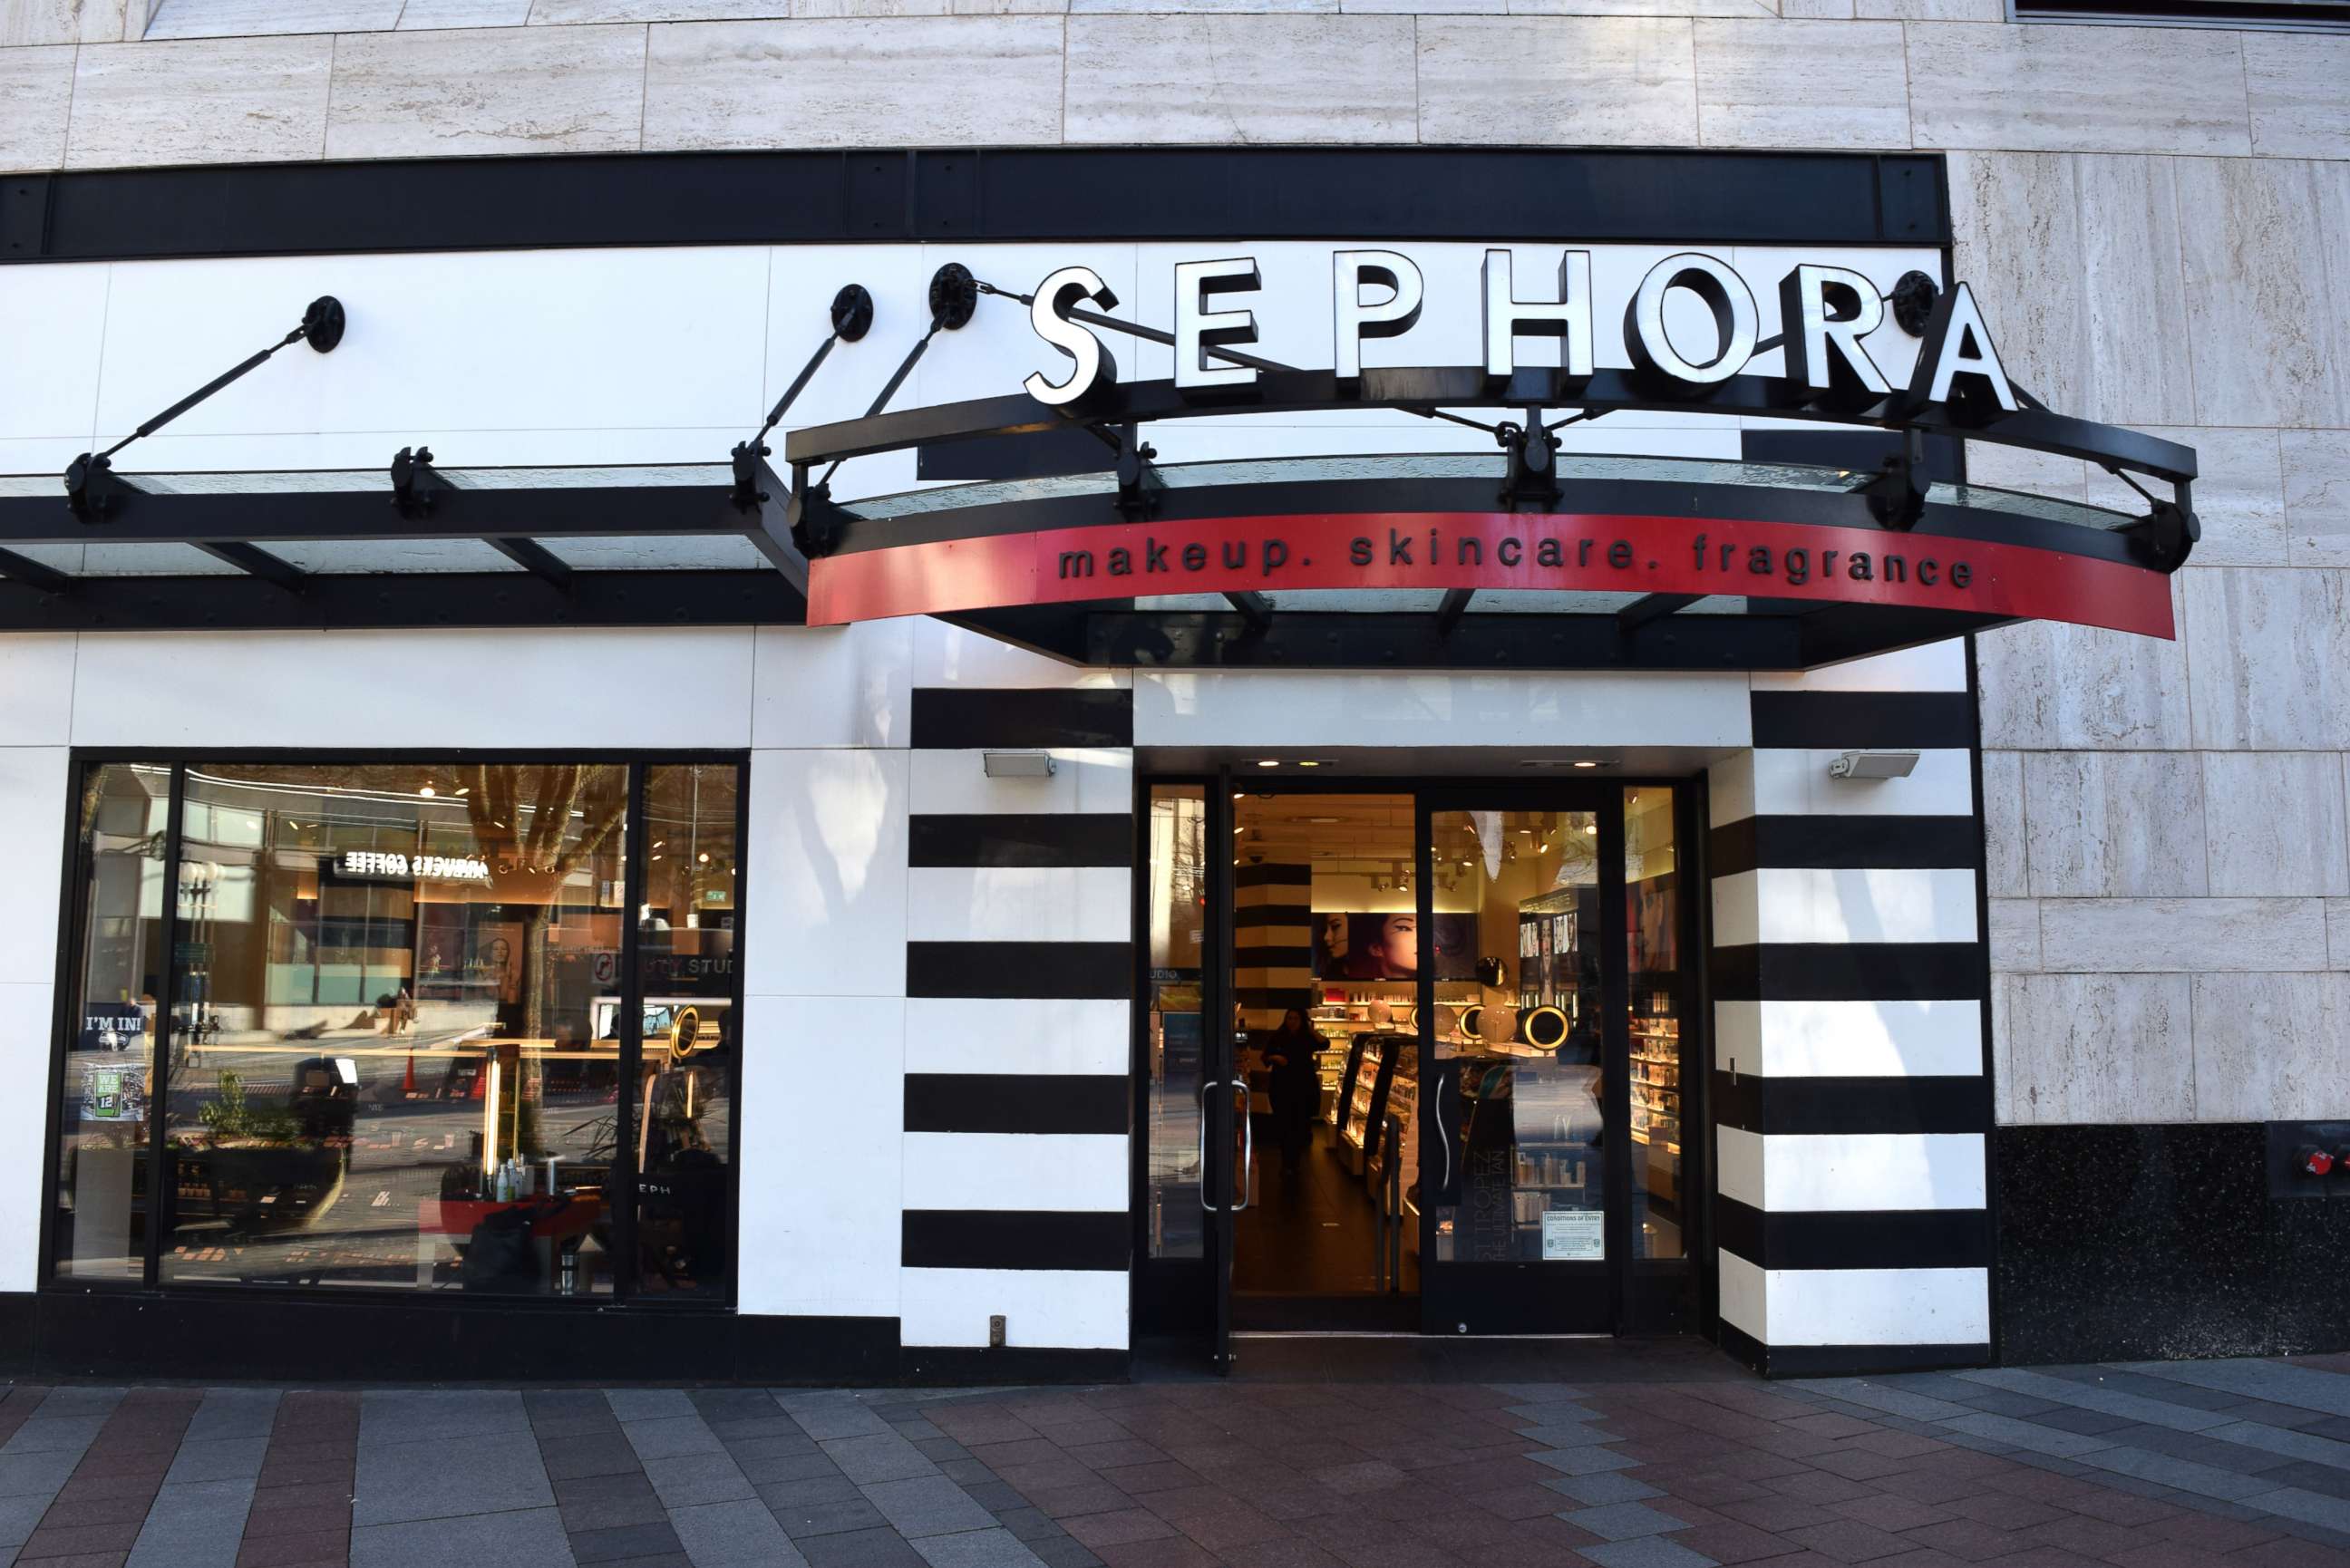 PHOTO: A Sephora storefront and sign are pictured.